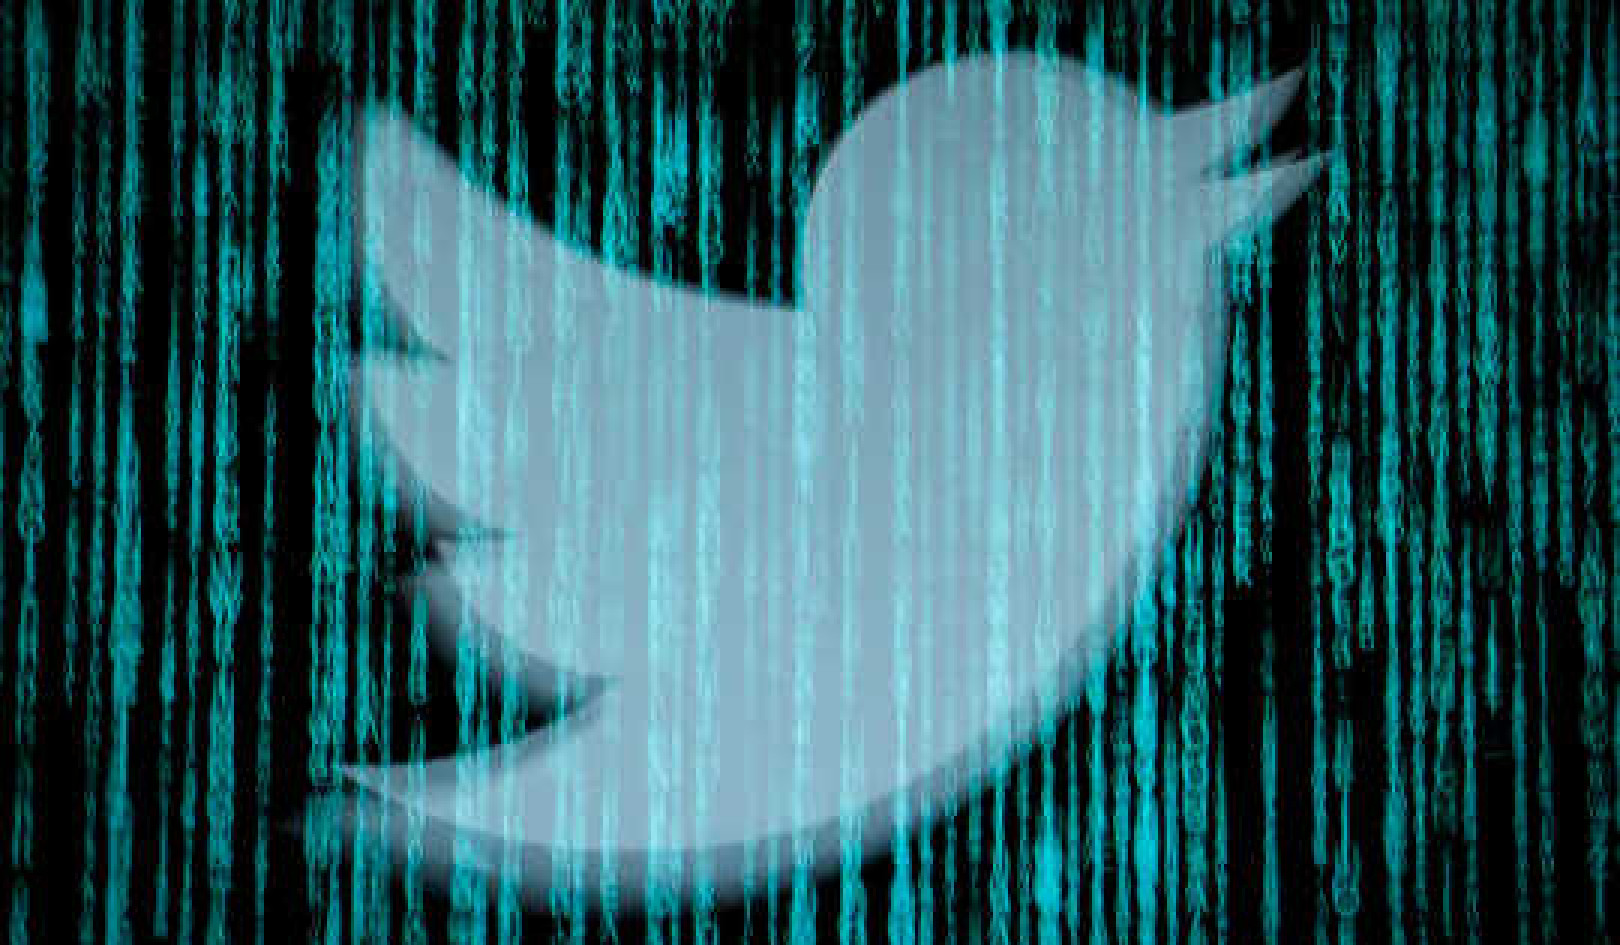 How The Twitter Hack Exposes Democracy and Society To A Broader Threat